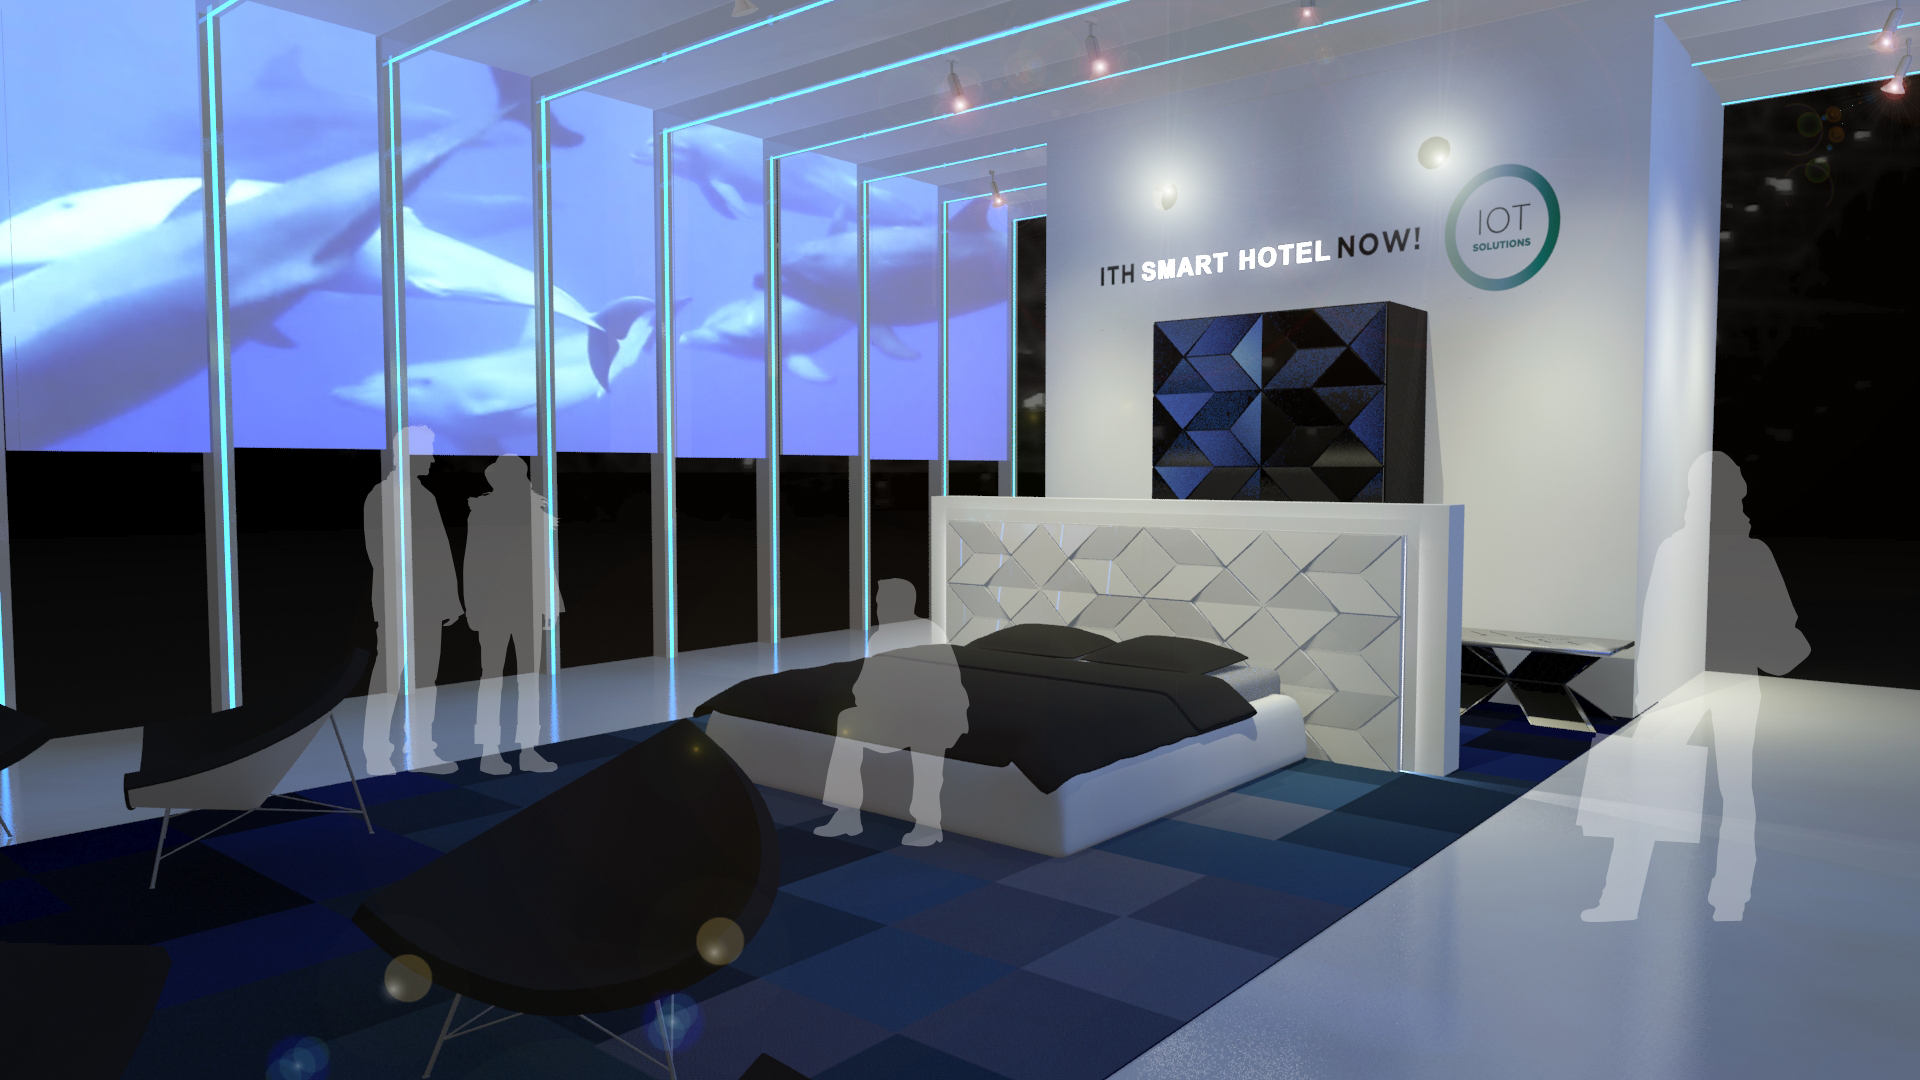 ITH Smart Hotel Now! by Broomx